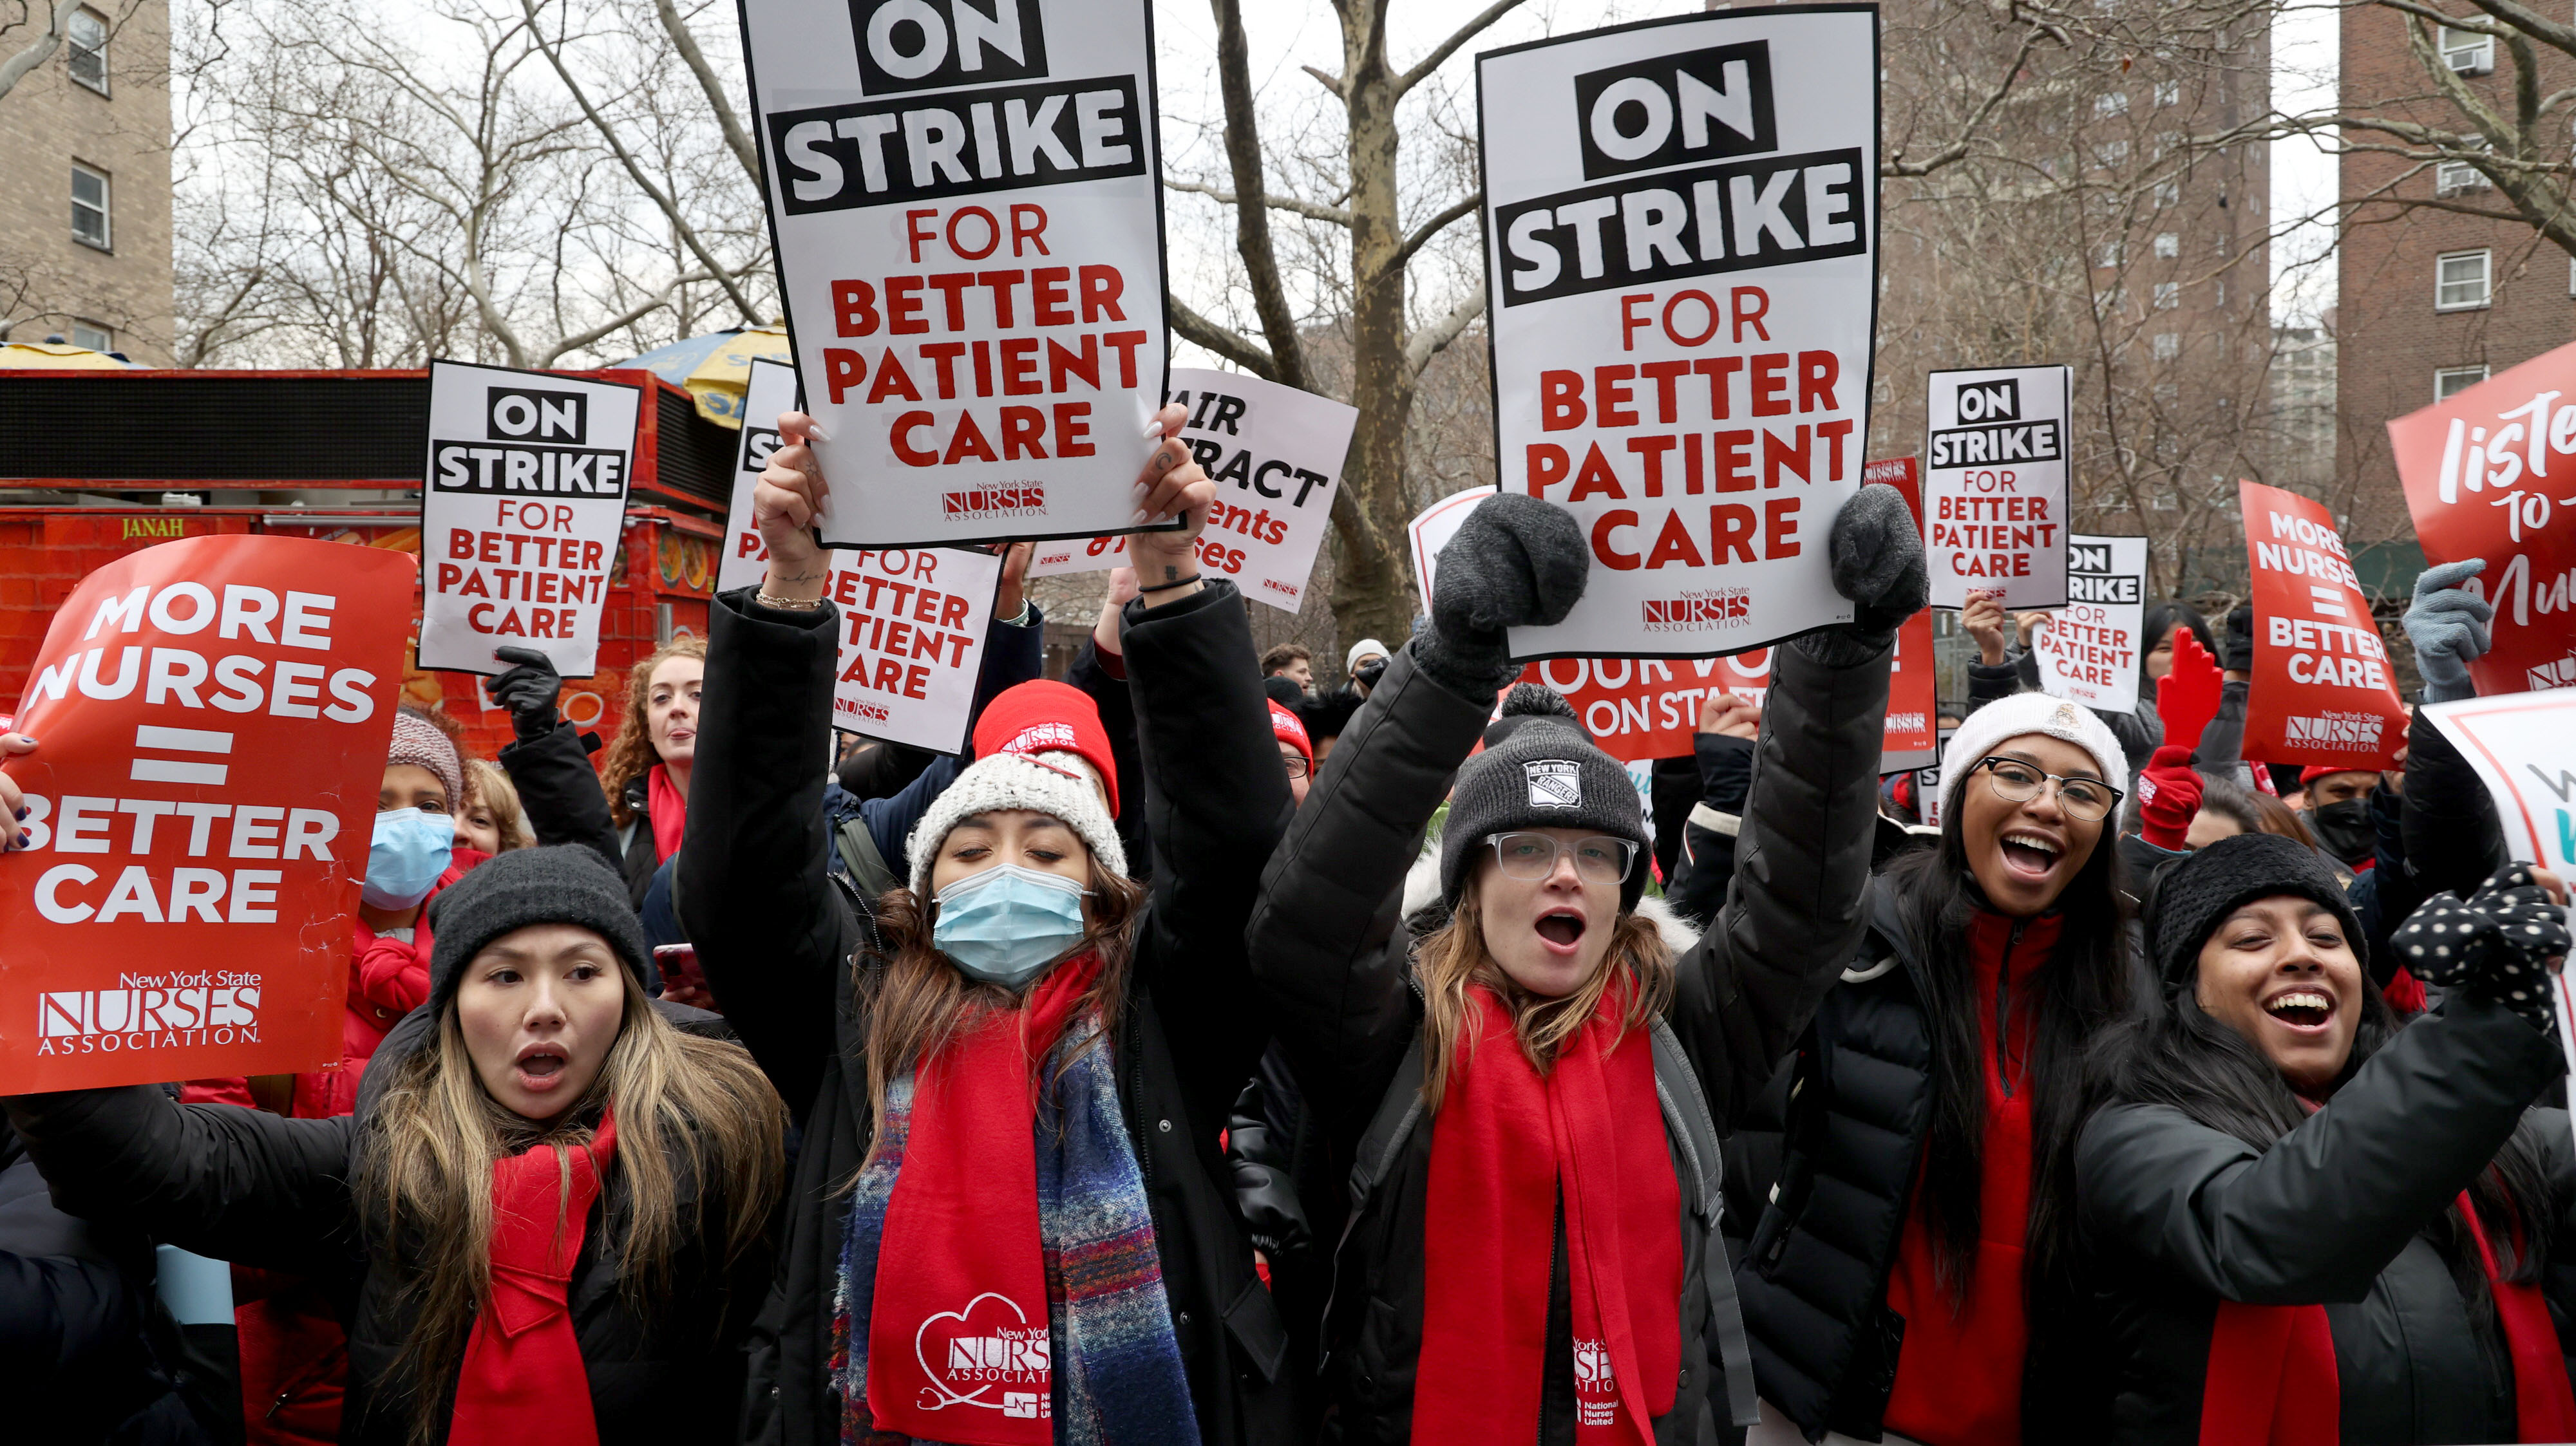 Nurses protesting outside a hospital hold saigns that read, “On strike for better patient care.”